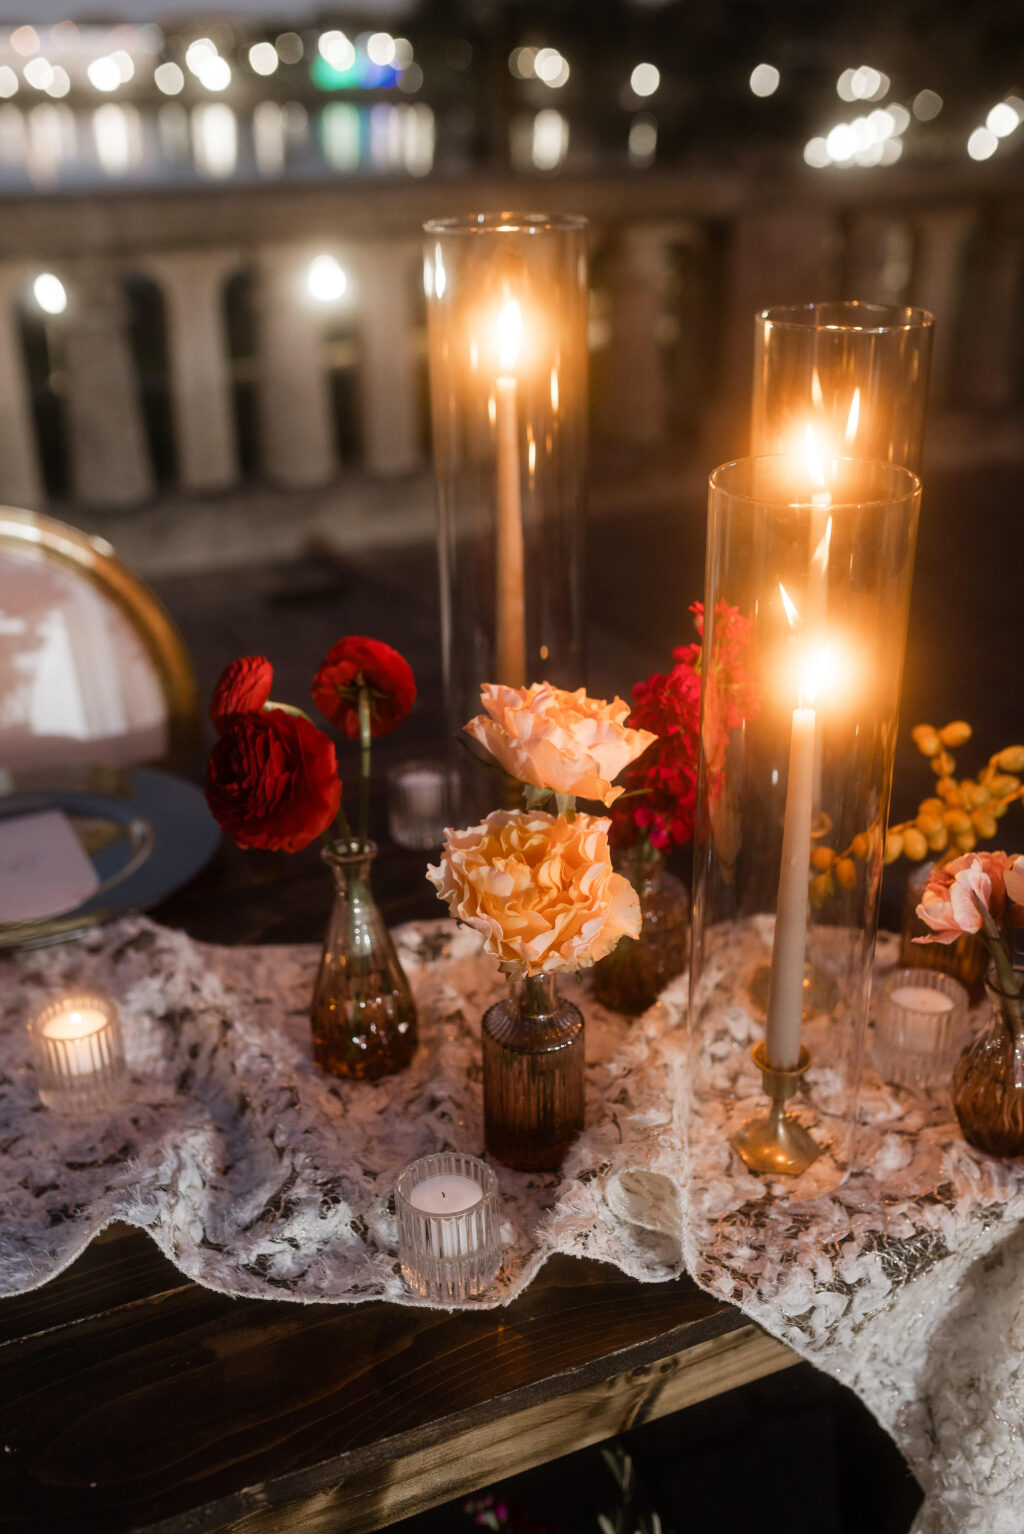 Lace Table Runner with Taper Candles and Hurricane Tube Glass | Maroon and Pink Garden Roses in Vintage Bud Vases | Moody Wedding Reception Inspiration